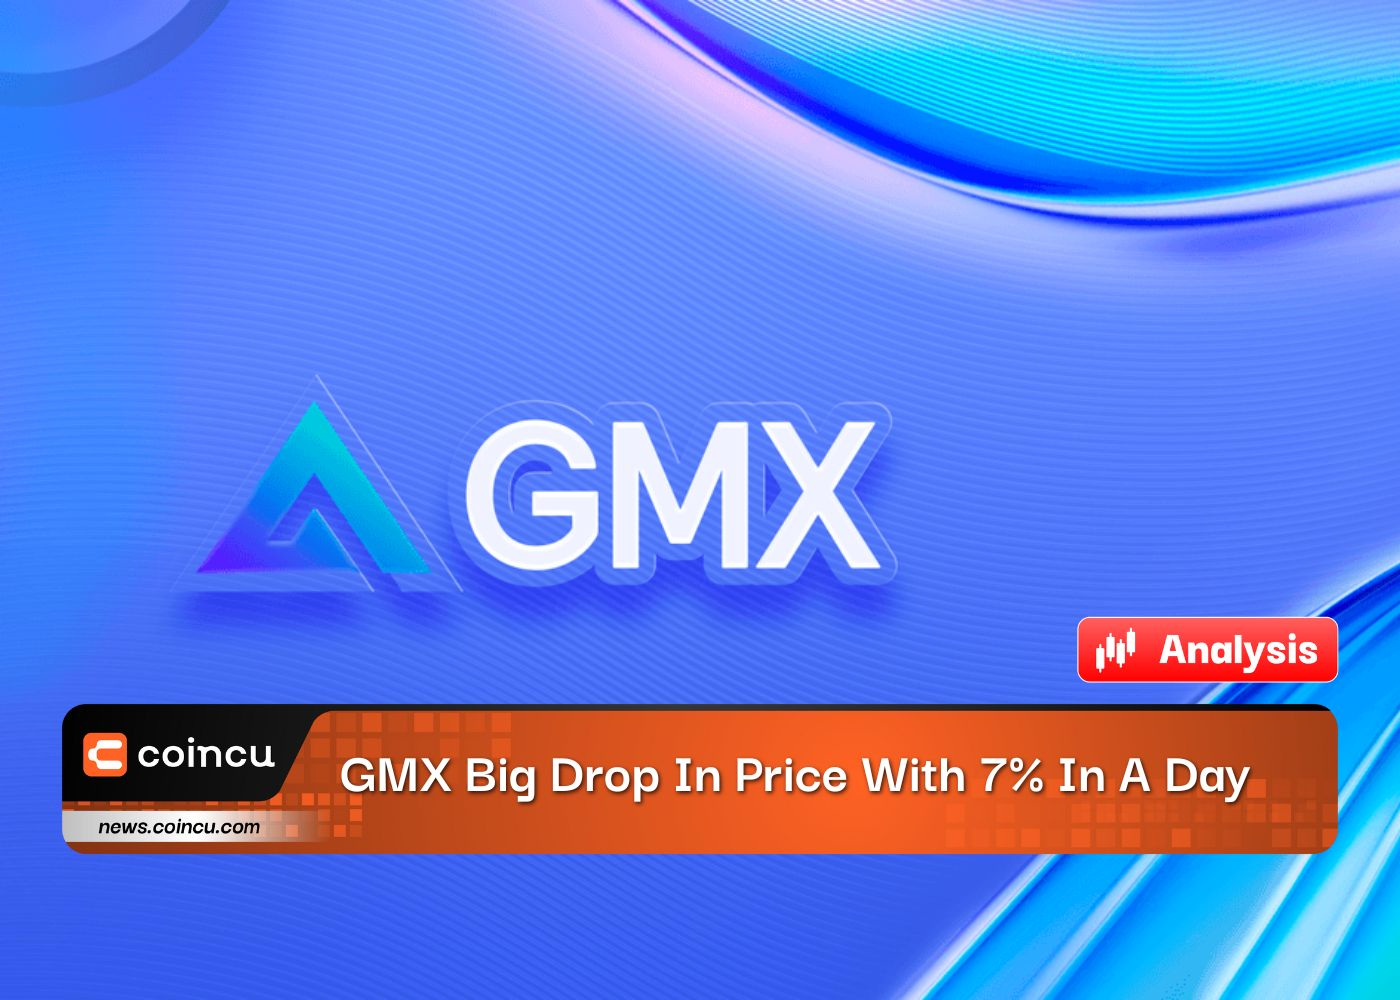 GMX Big Drop In Price With 7% In A Day